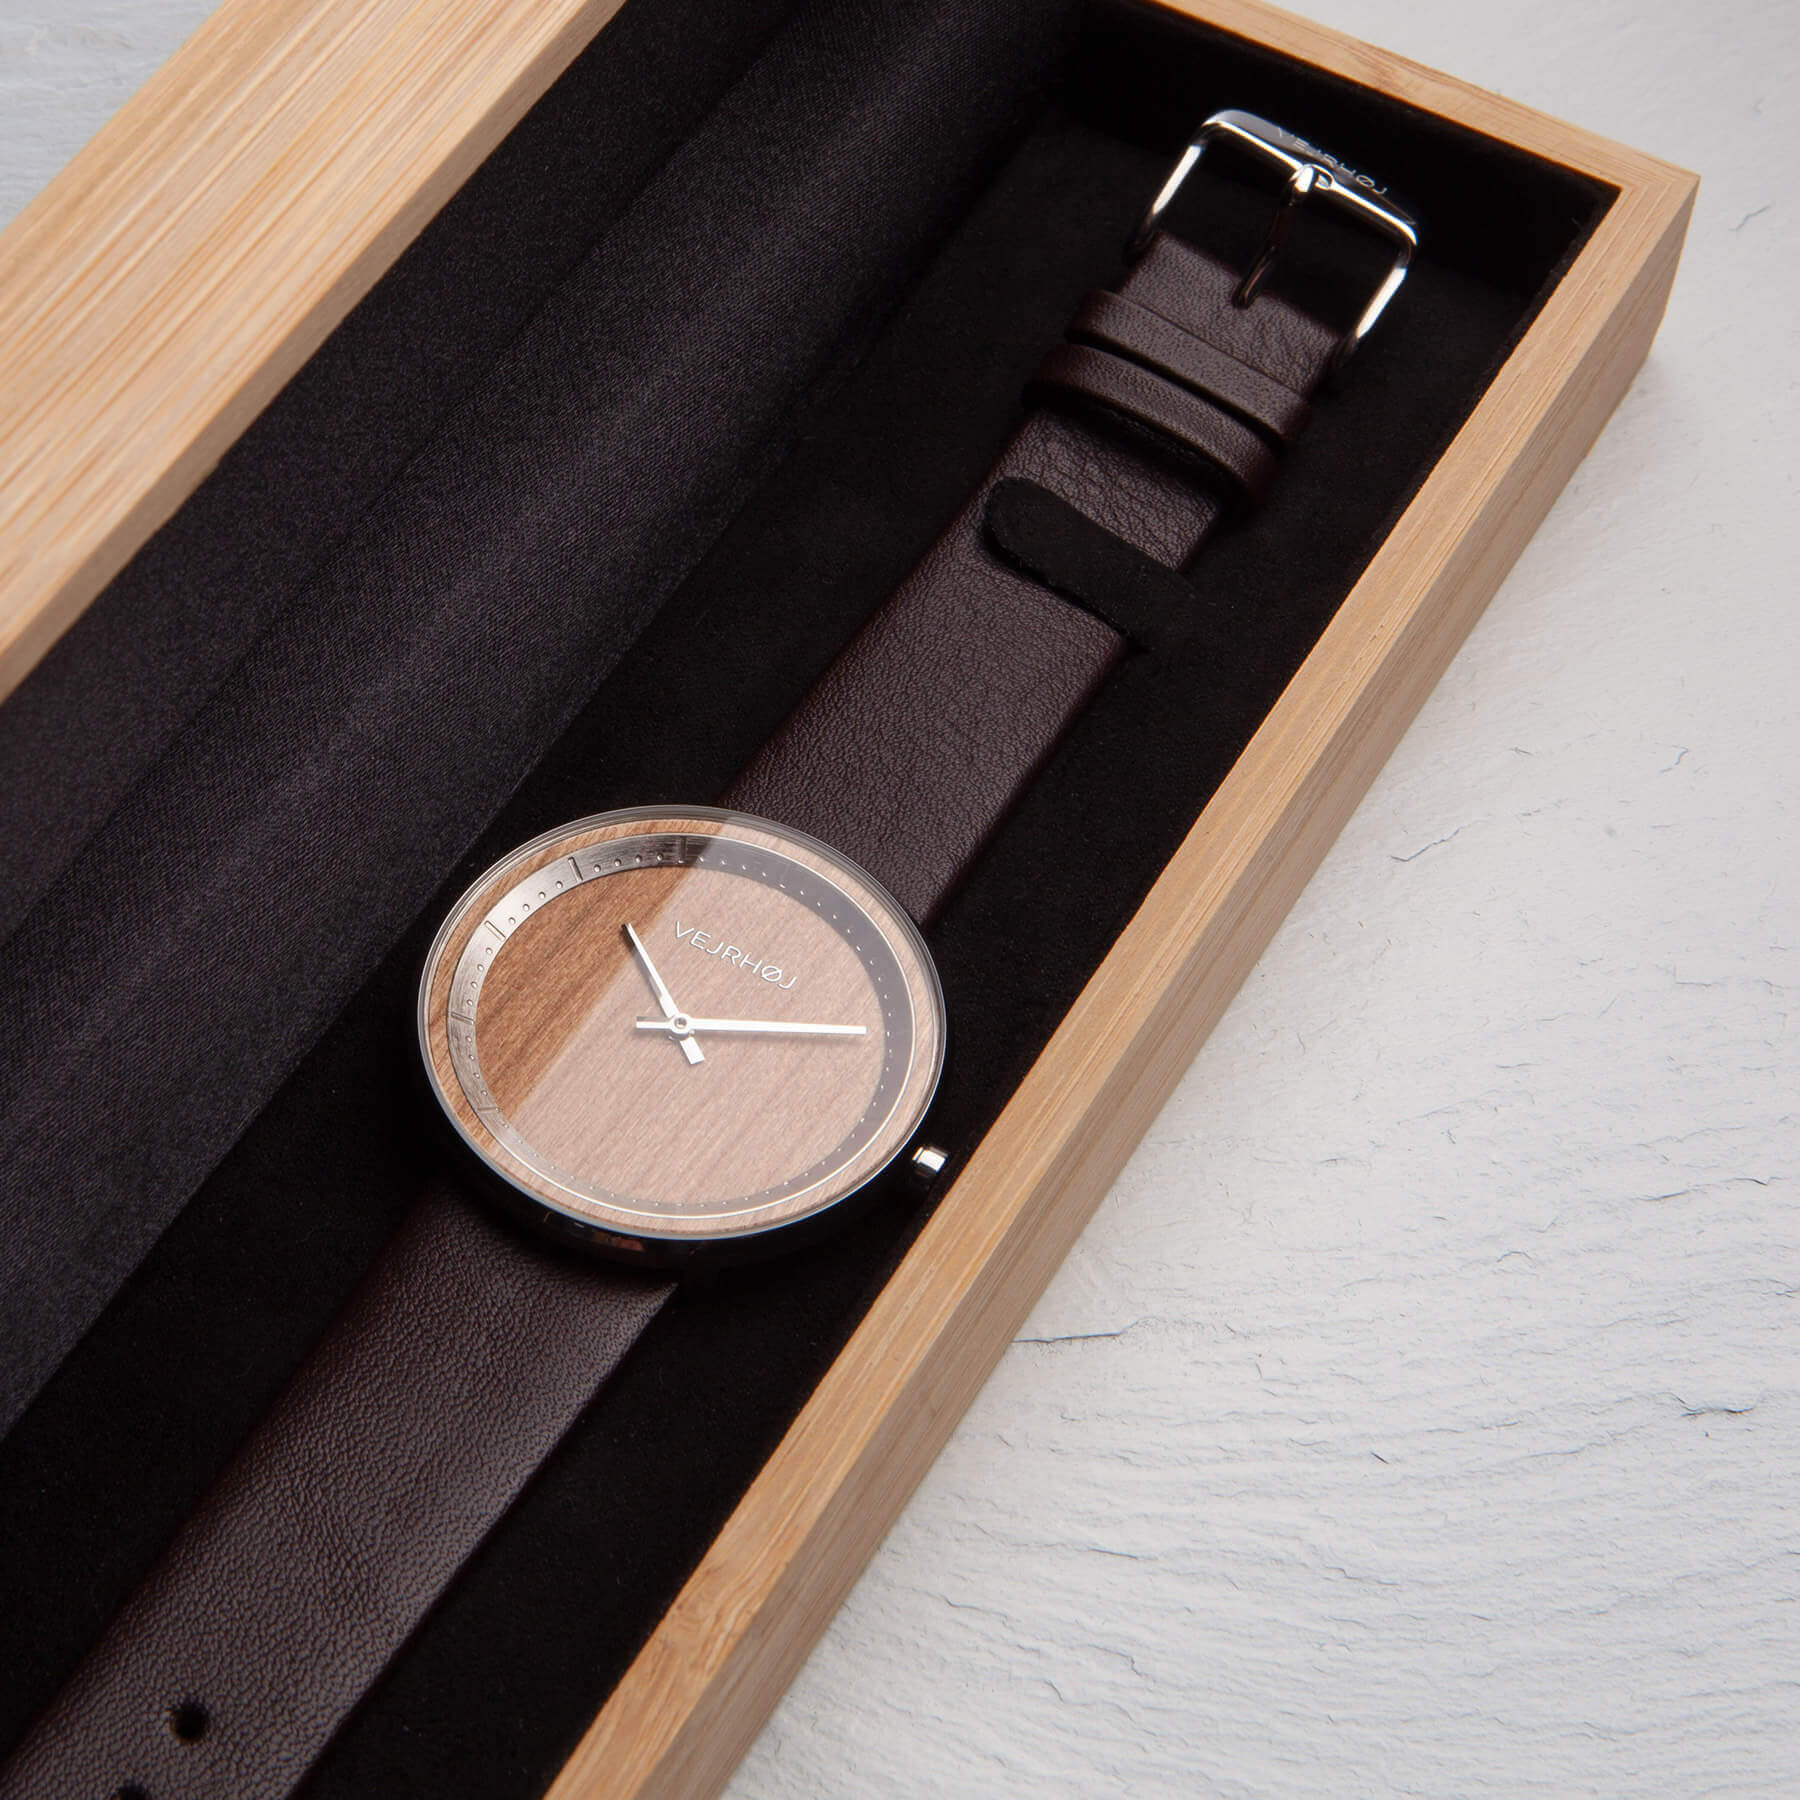 simple wood watch in a wooden box